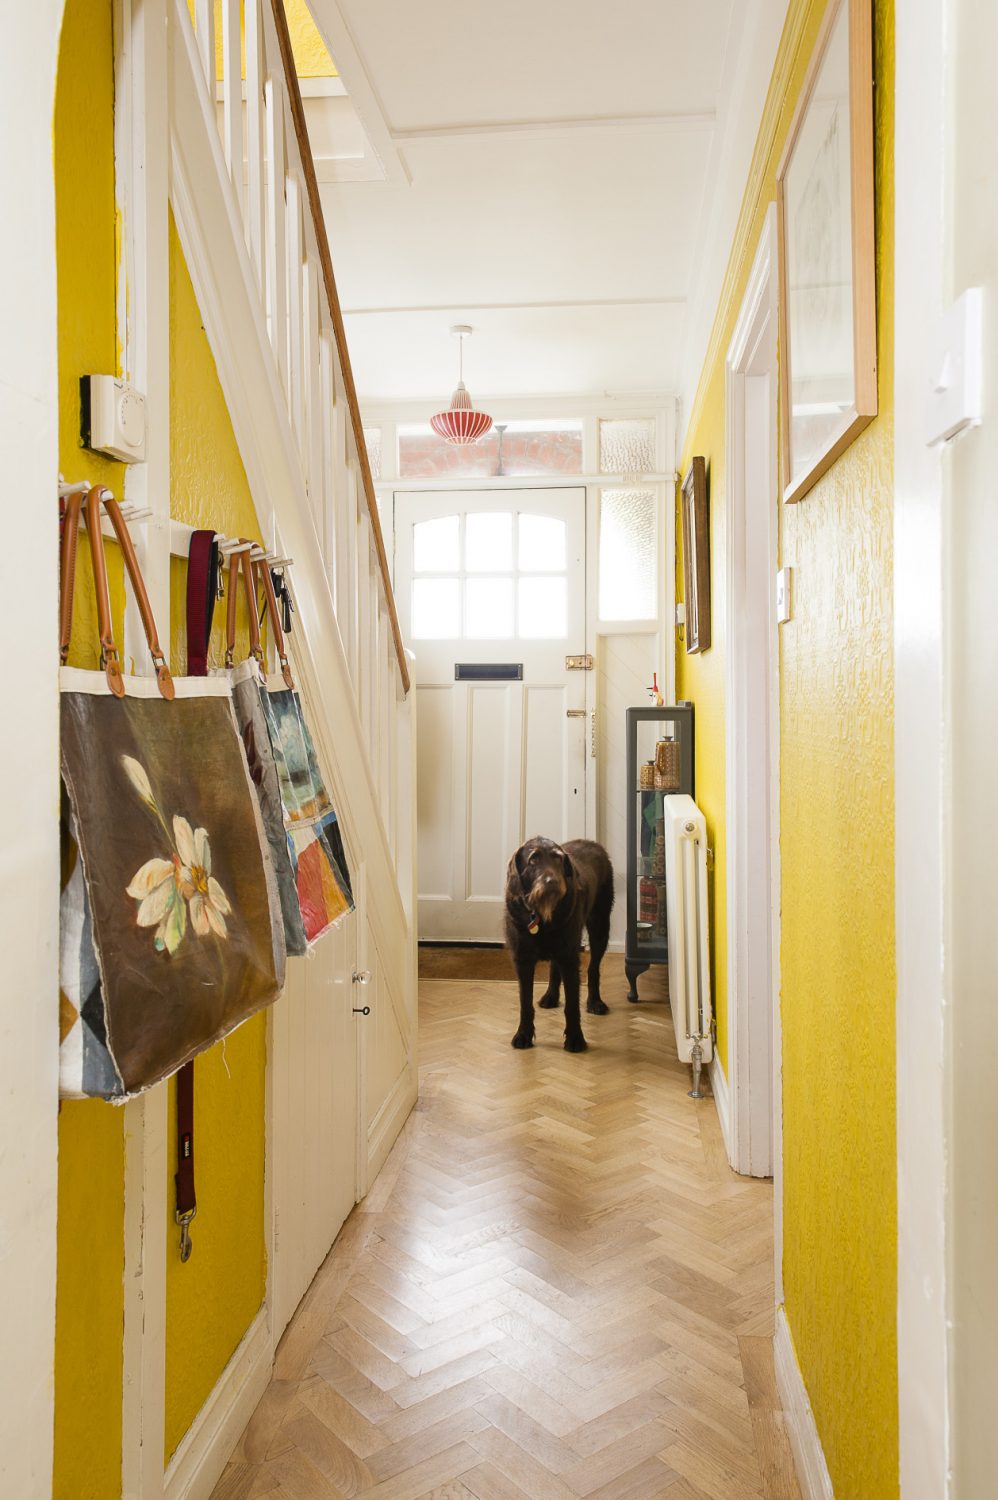 Hand-painted canvas bags from John and Anna’s latest project hang from hooks in the hallway